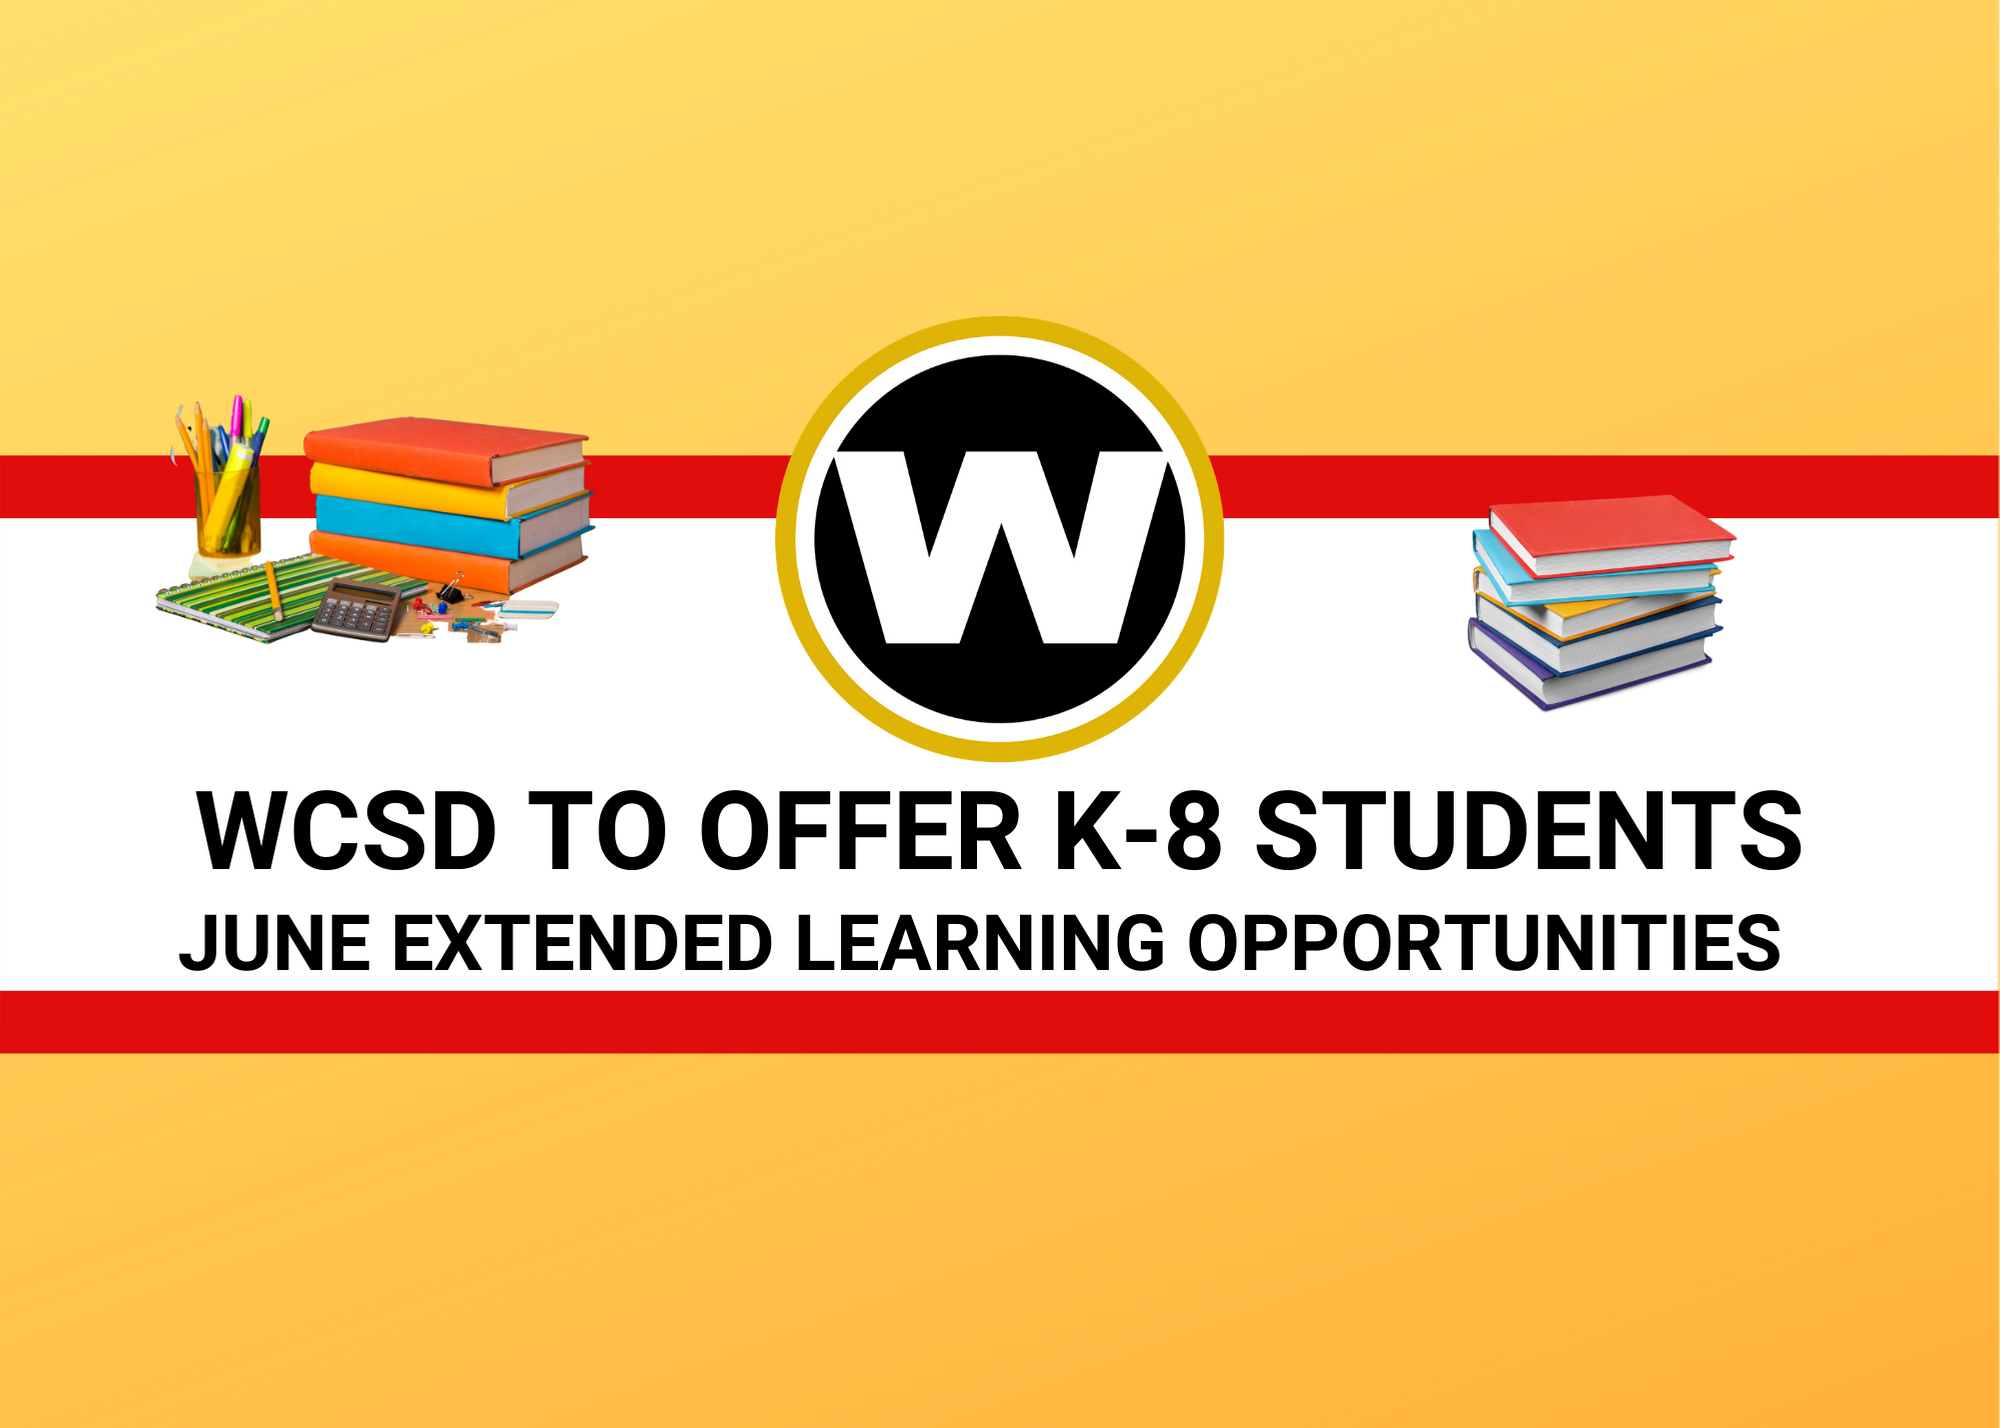 WCSD Accepting Applications for JUNE EXTENDED LEARNING OPPORTUNITIES